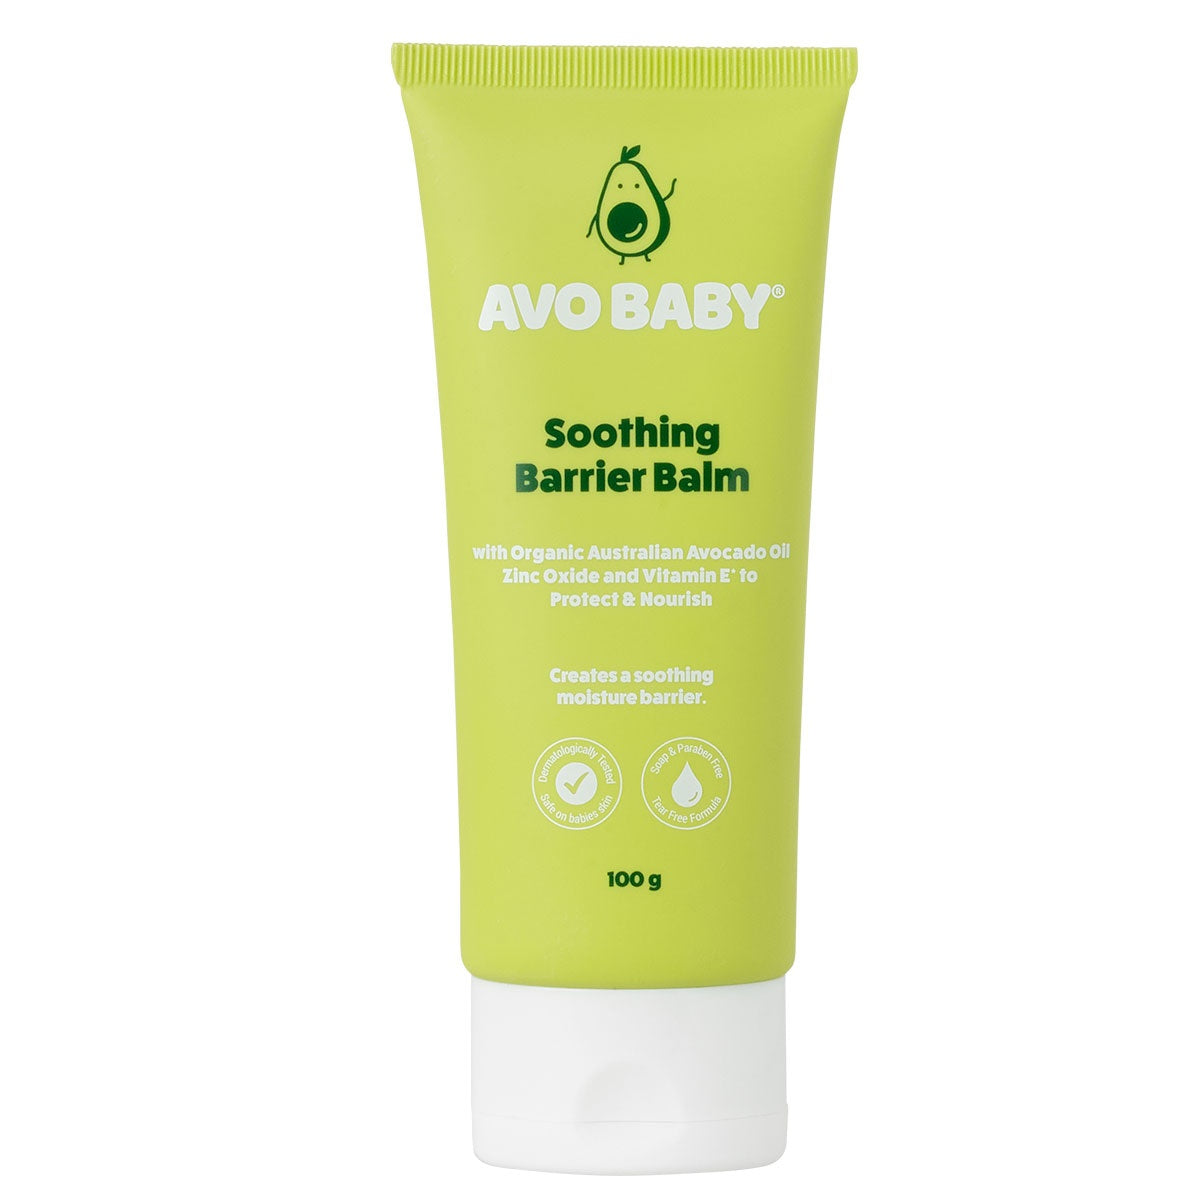 Avo Baby Soothing Barrier Balm 100g